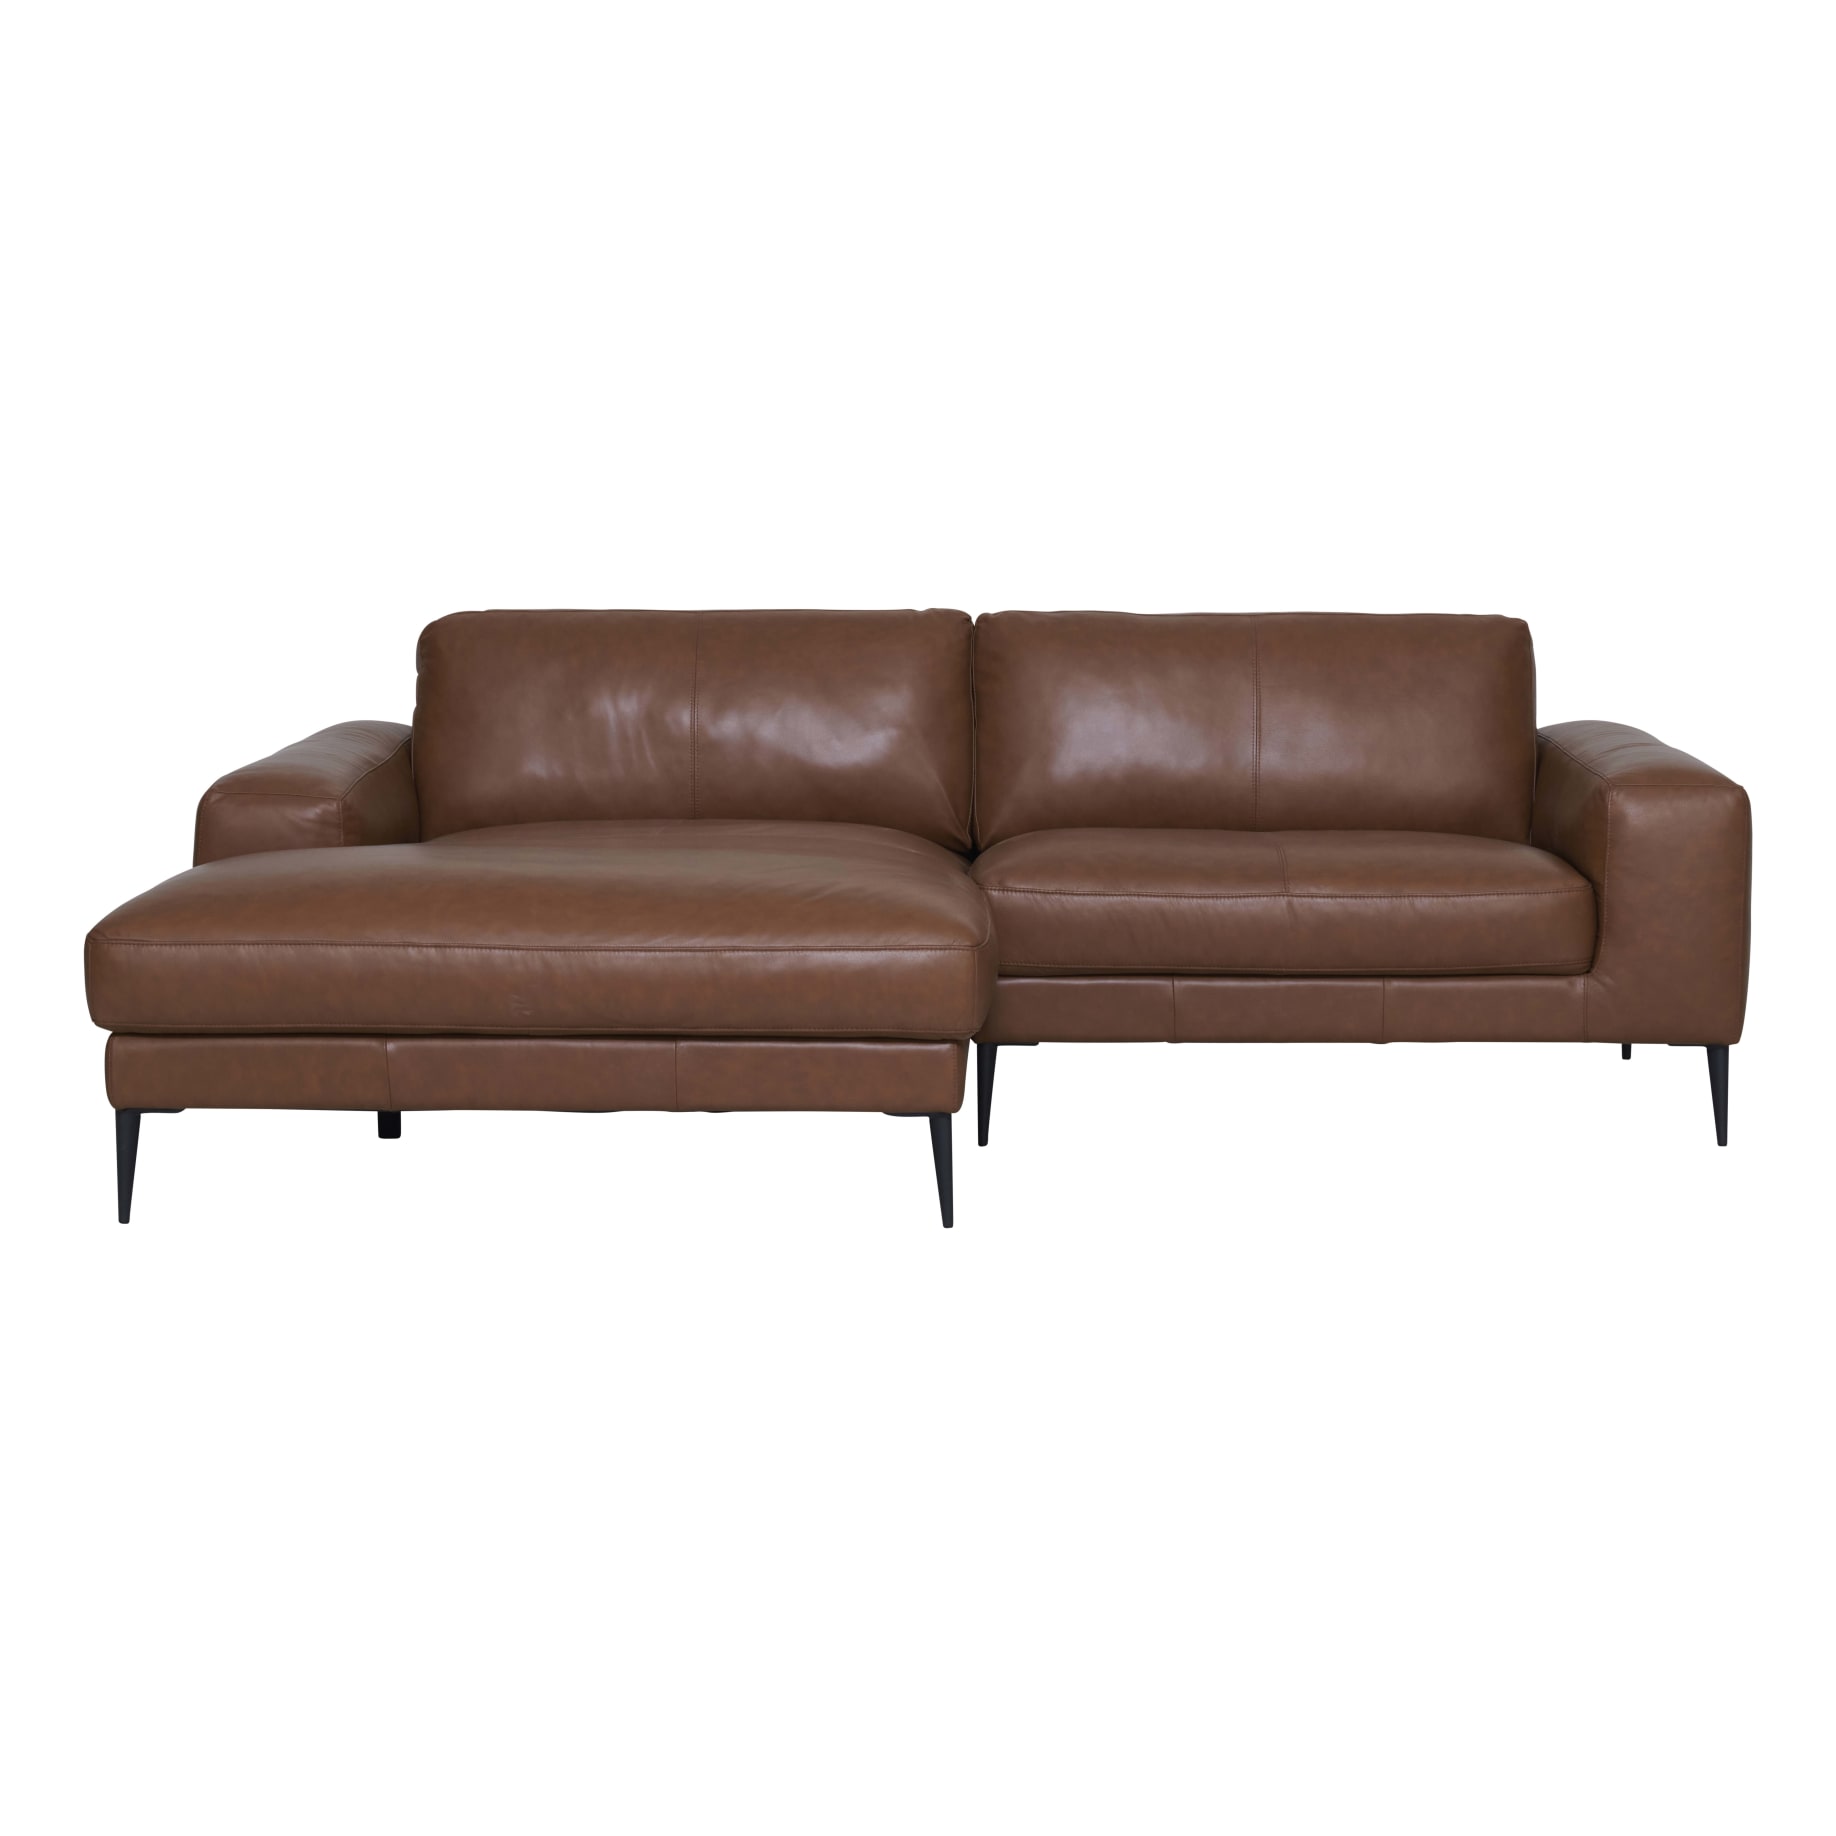 Amory Double Chaise LHF in Alpine Leather Camel